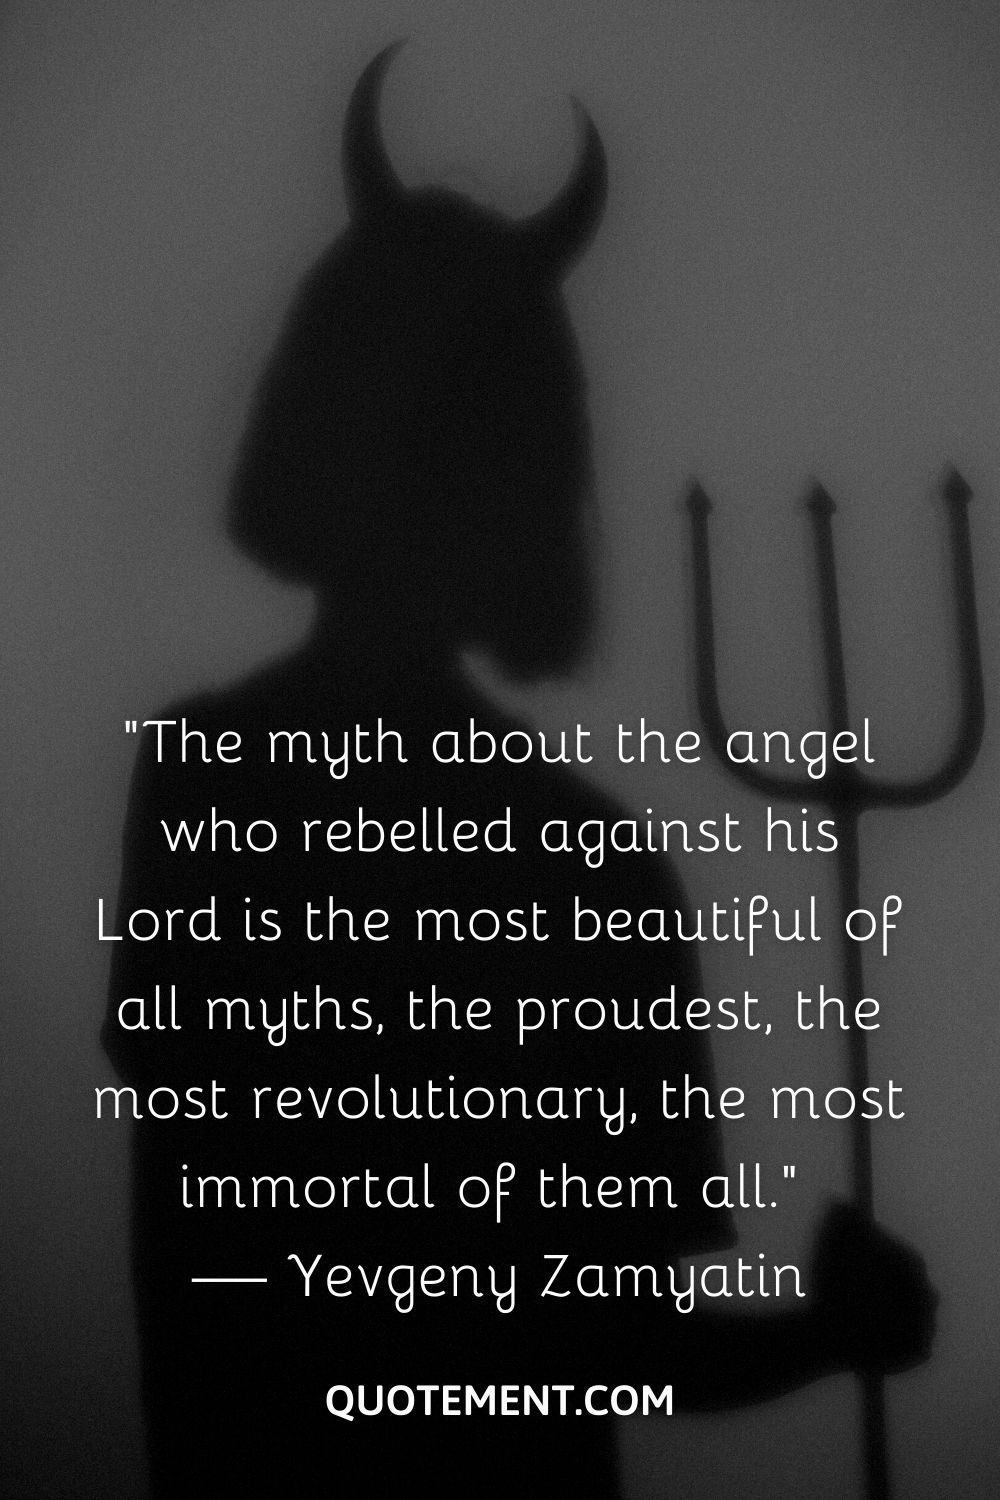 “The myth about the angel who rebelled against his Lord is the most beautiful of all myths, the proudest, the most revolutionary, the most immortal of them all.” — Yevgeny Zamyatin